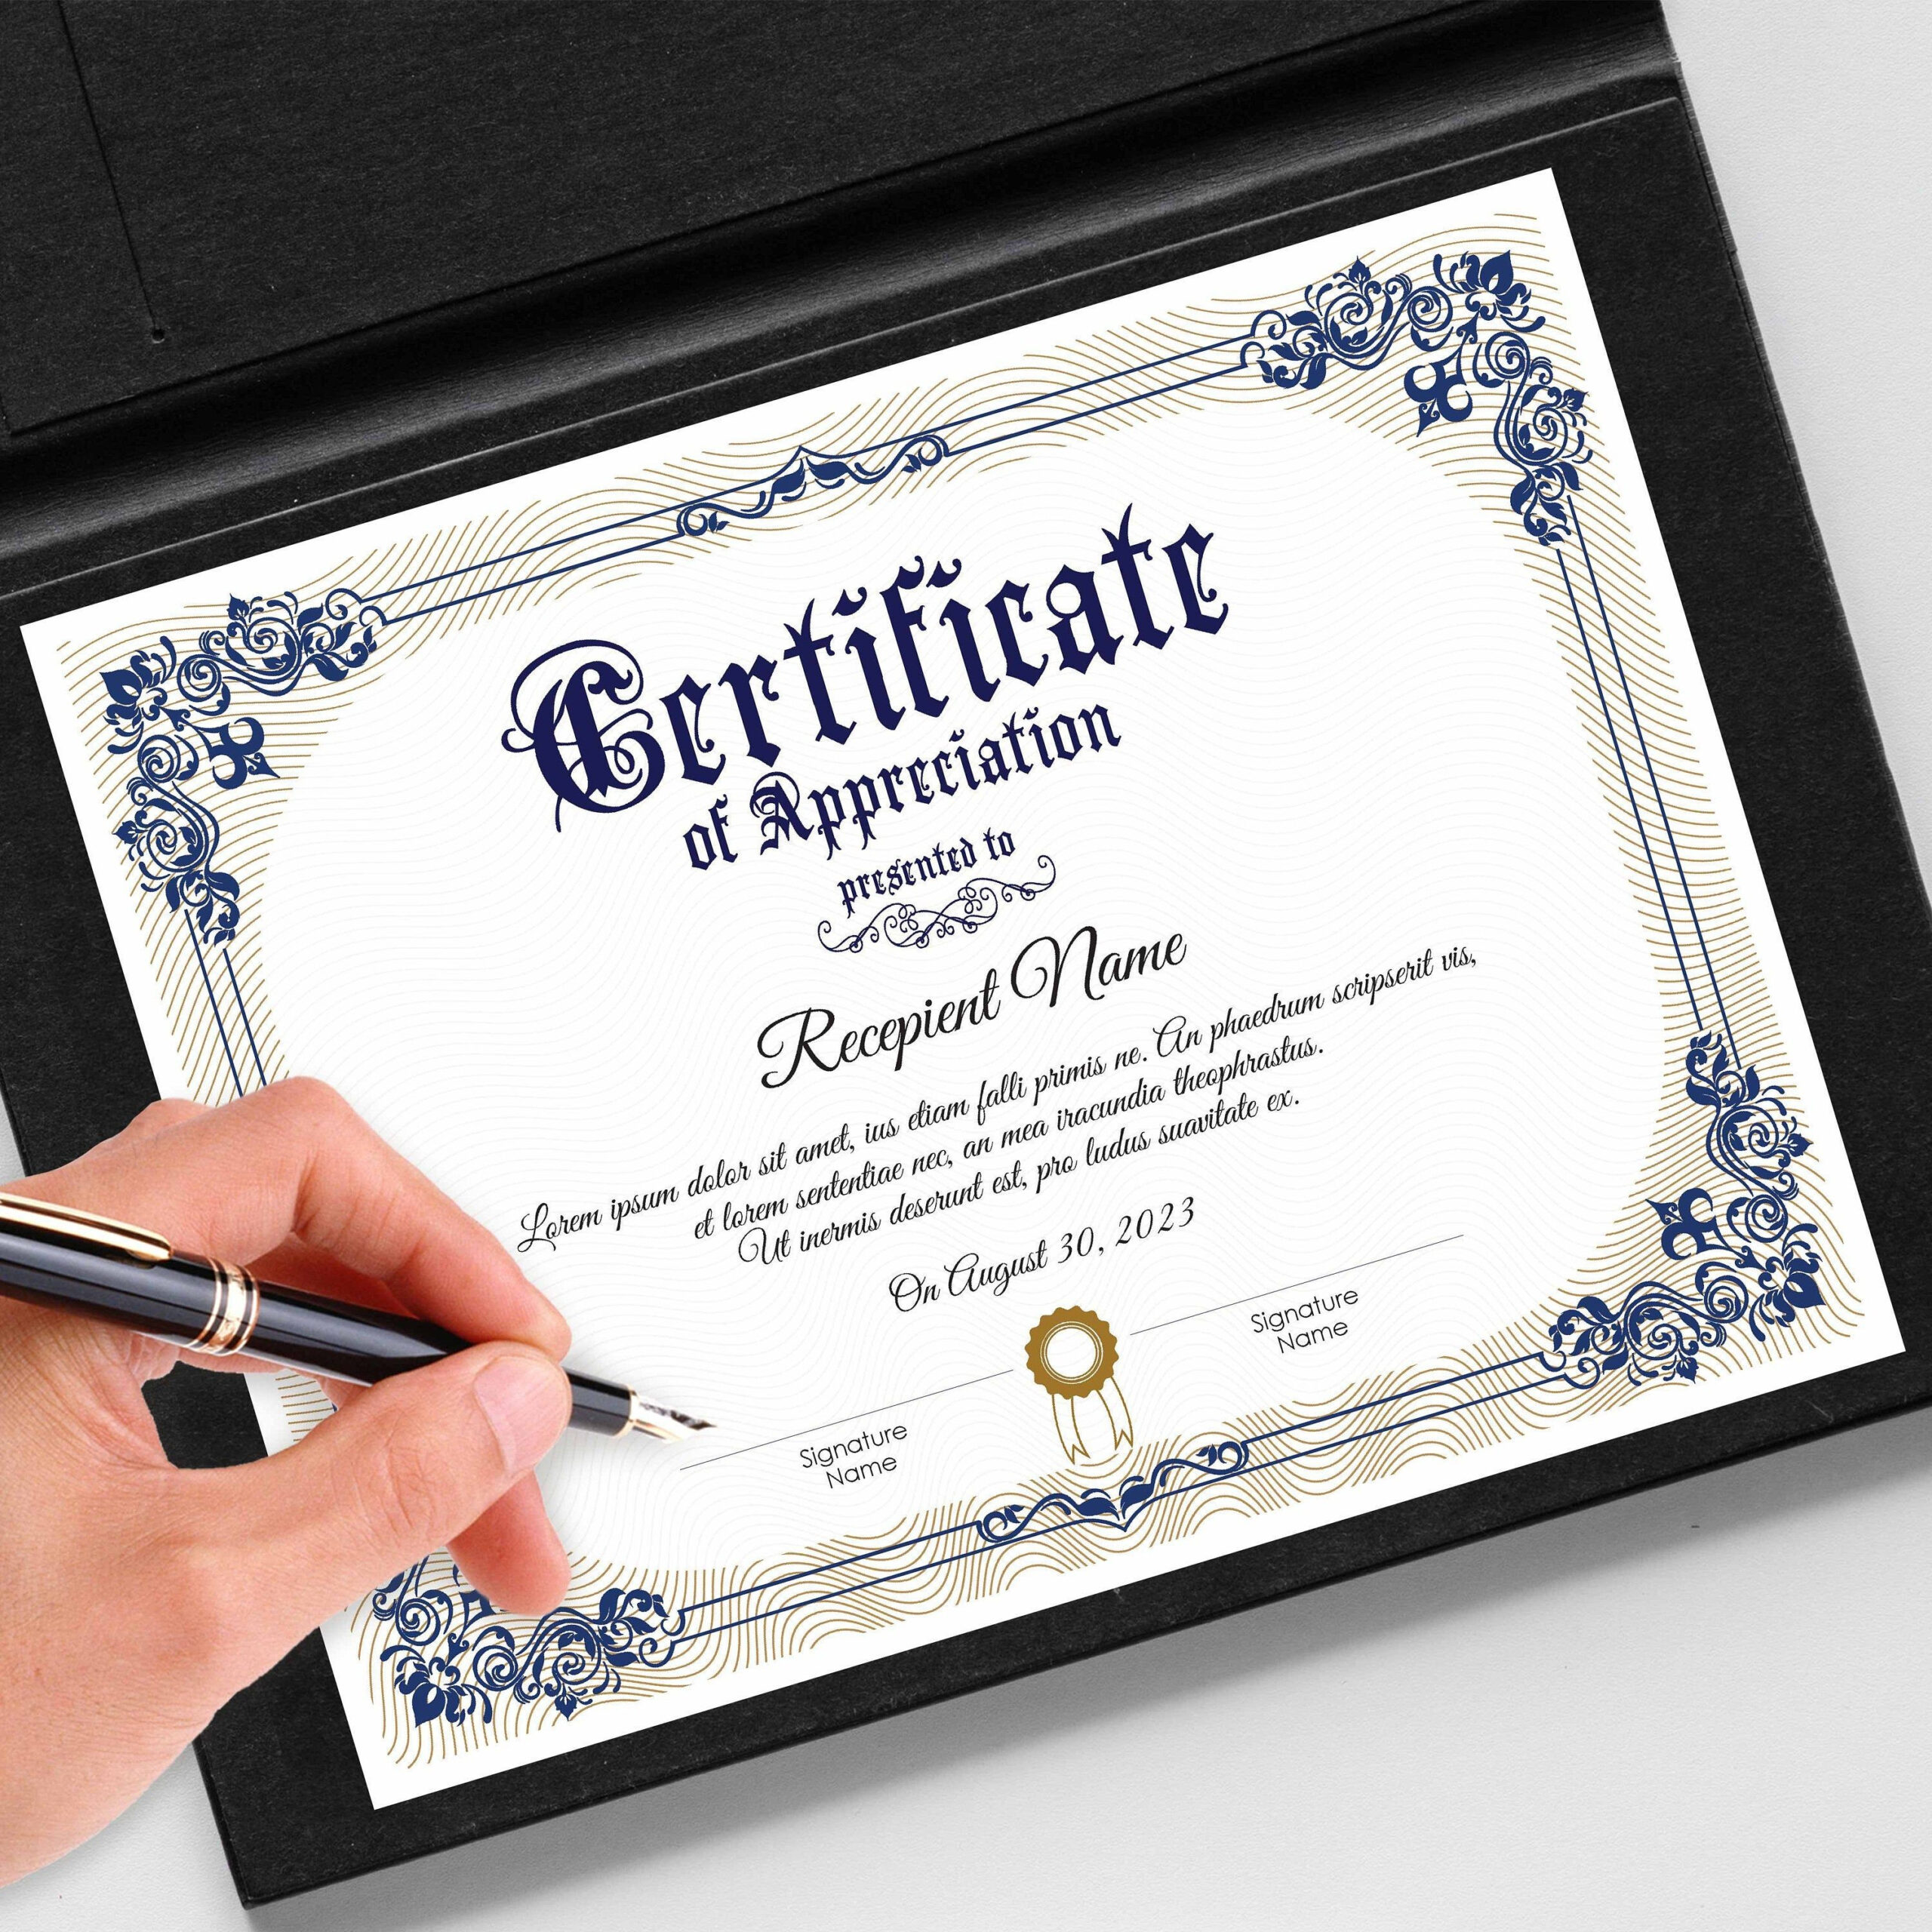 Editable Certificate Of Appreciation Template Printable - Etsy within Recognition Certificate Editable